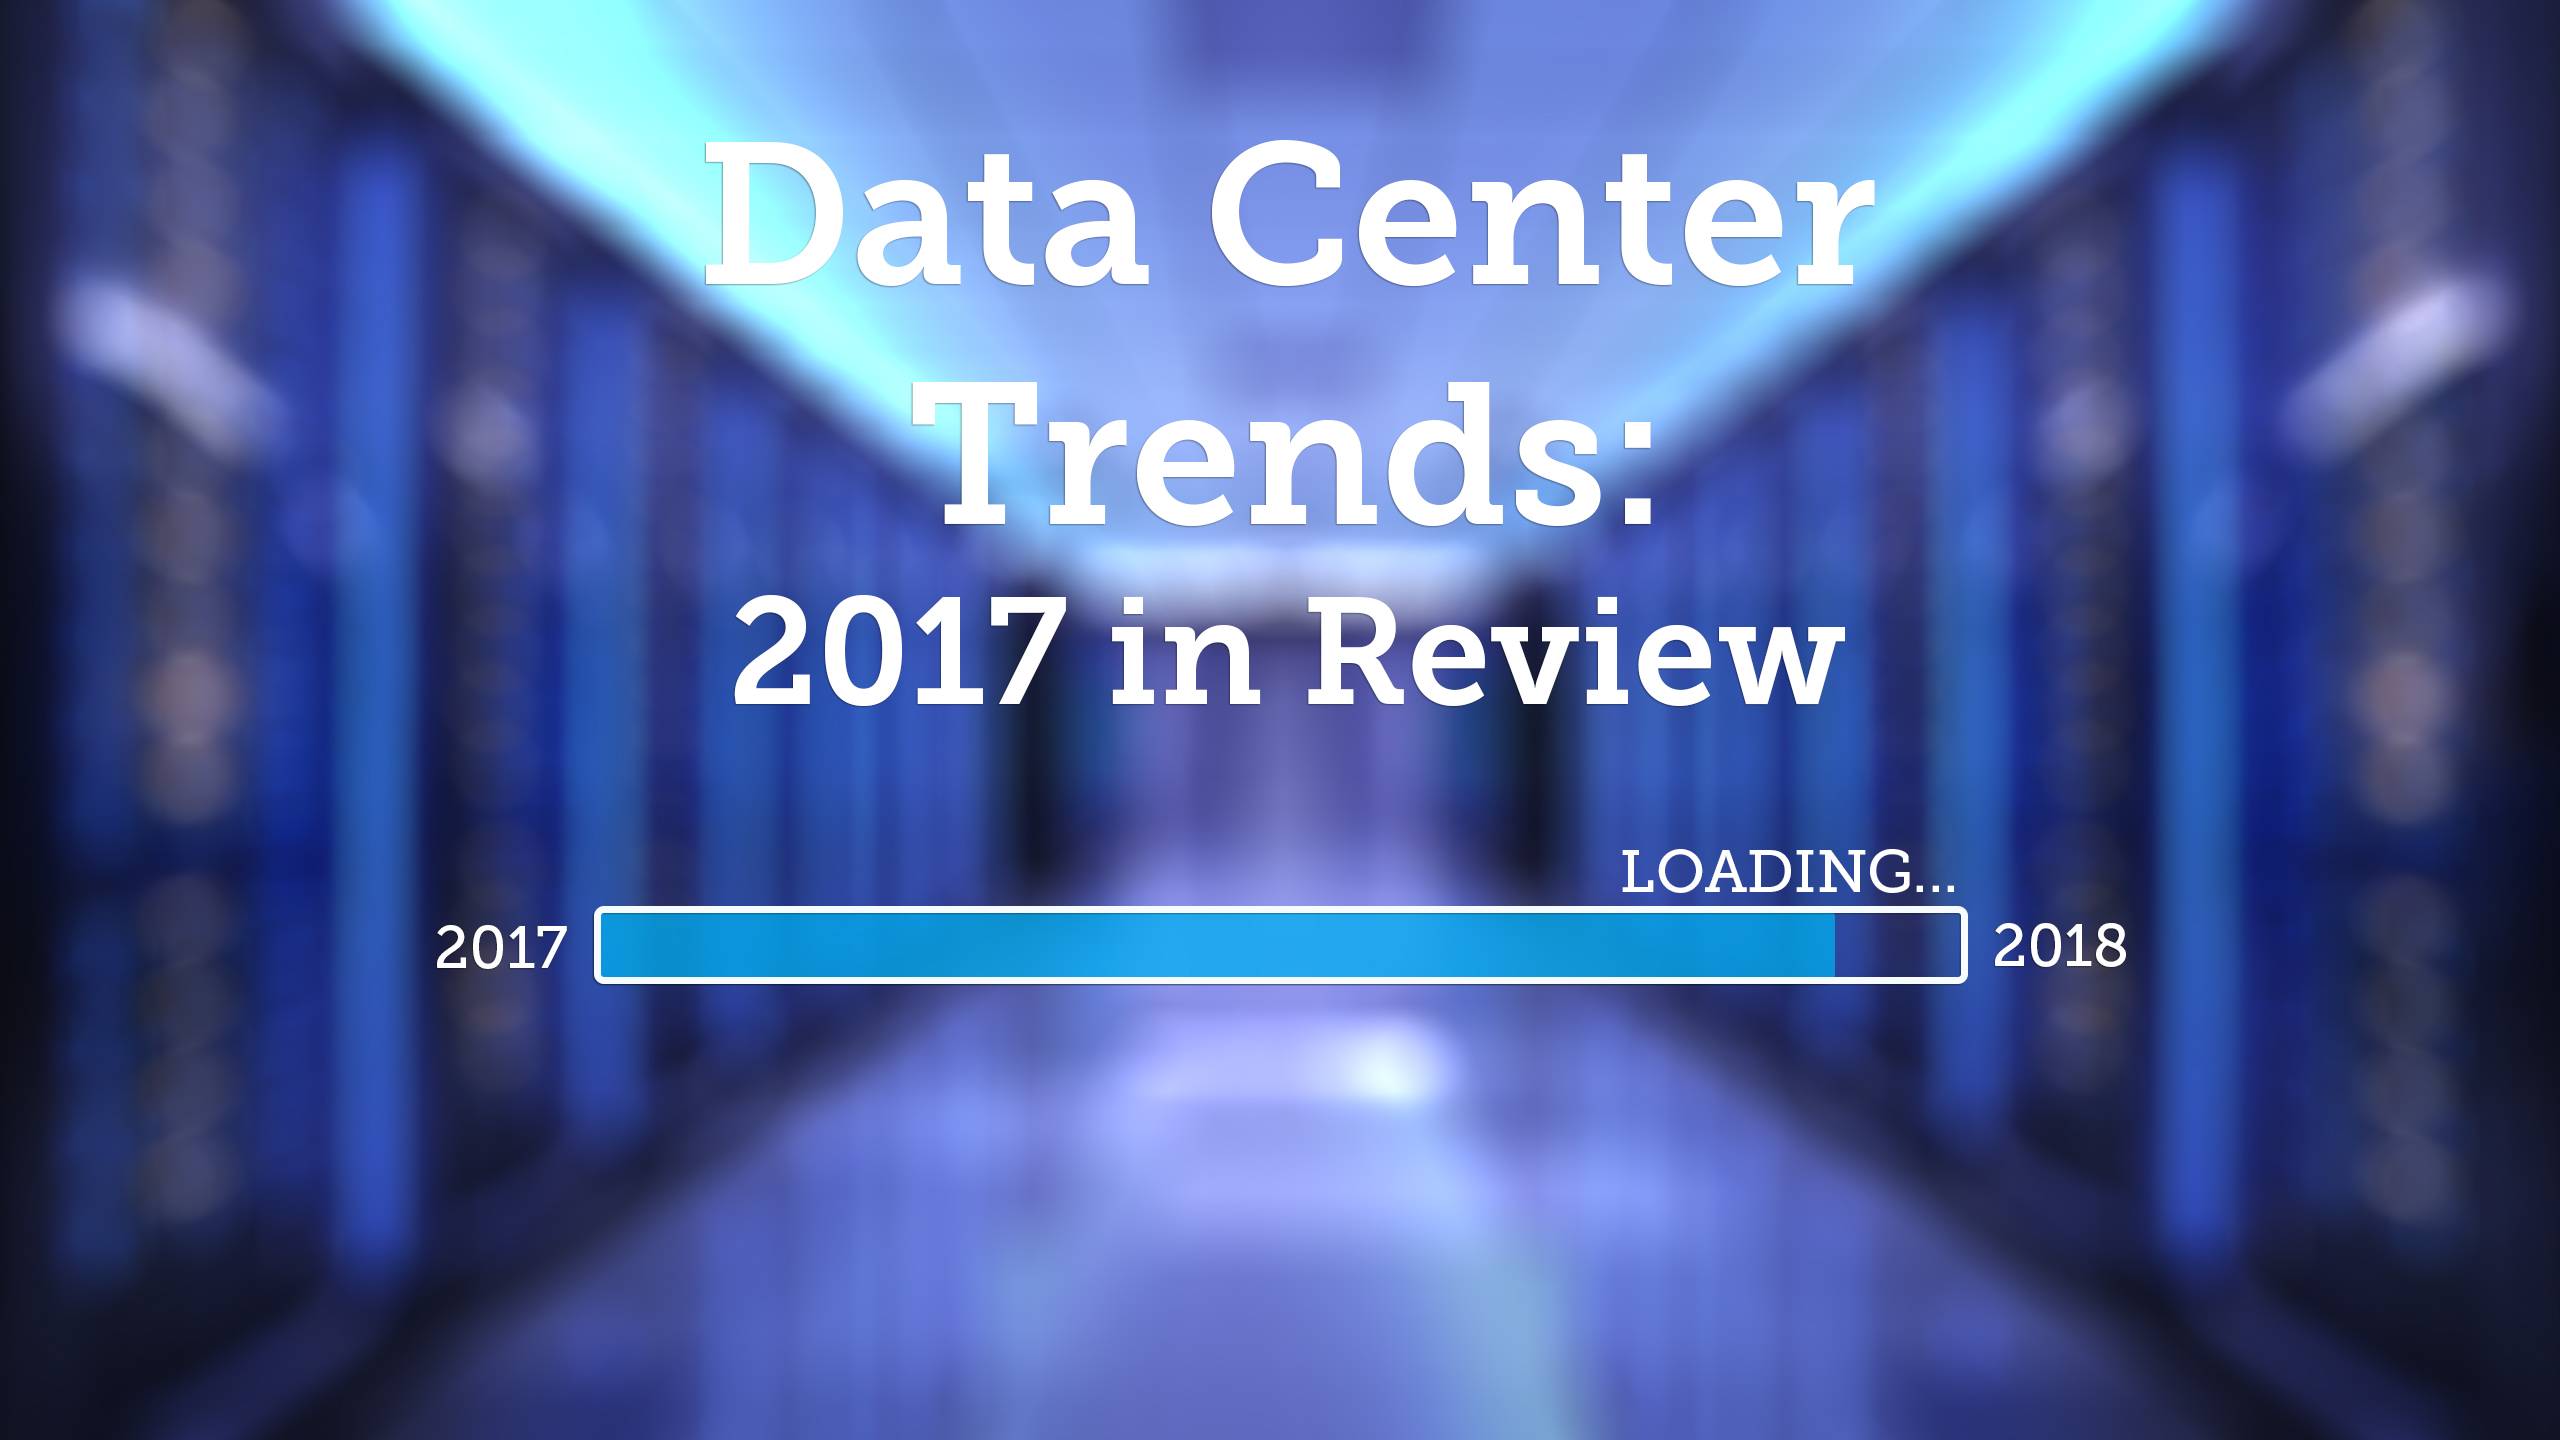 Data Center Trends: 2017 in Review